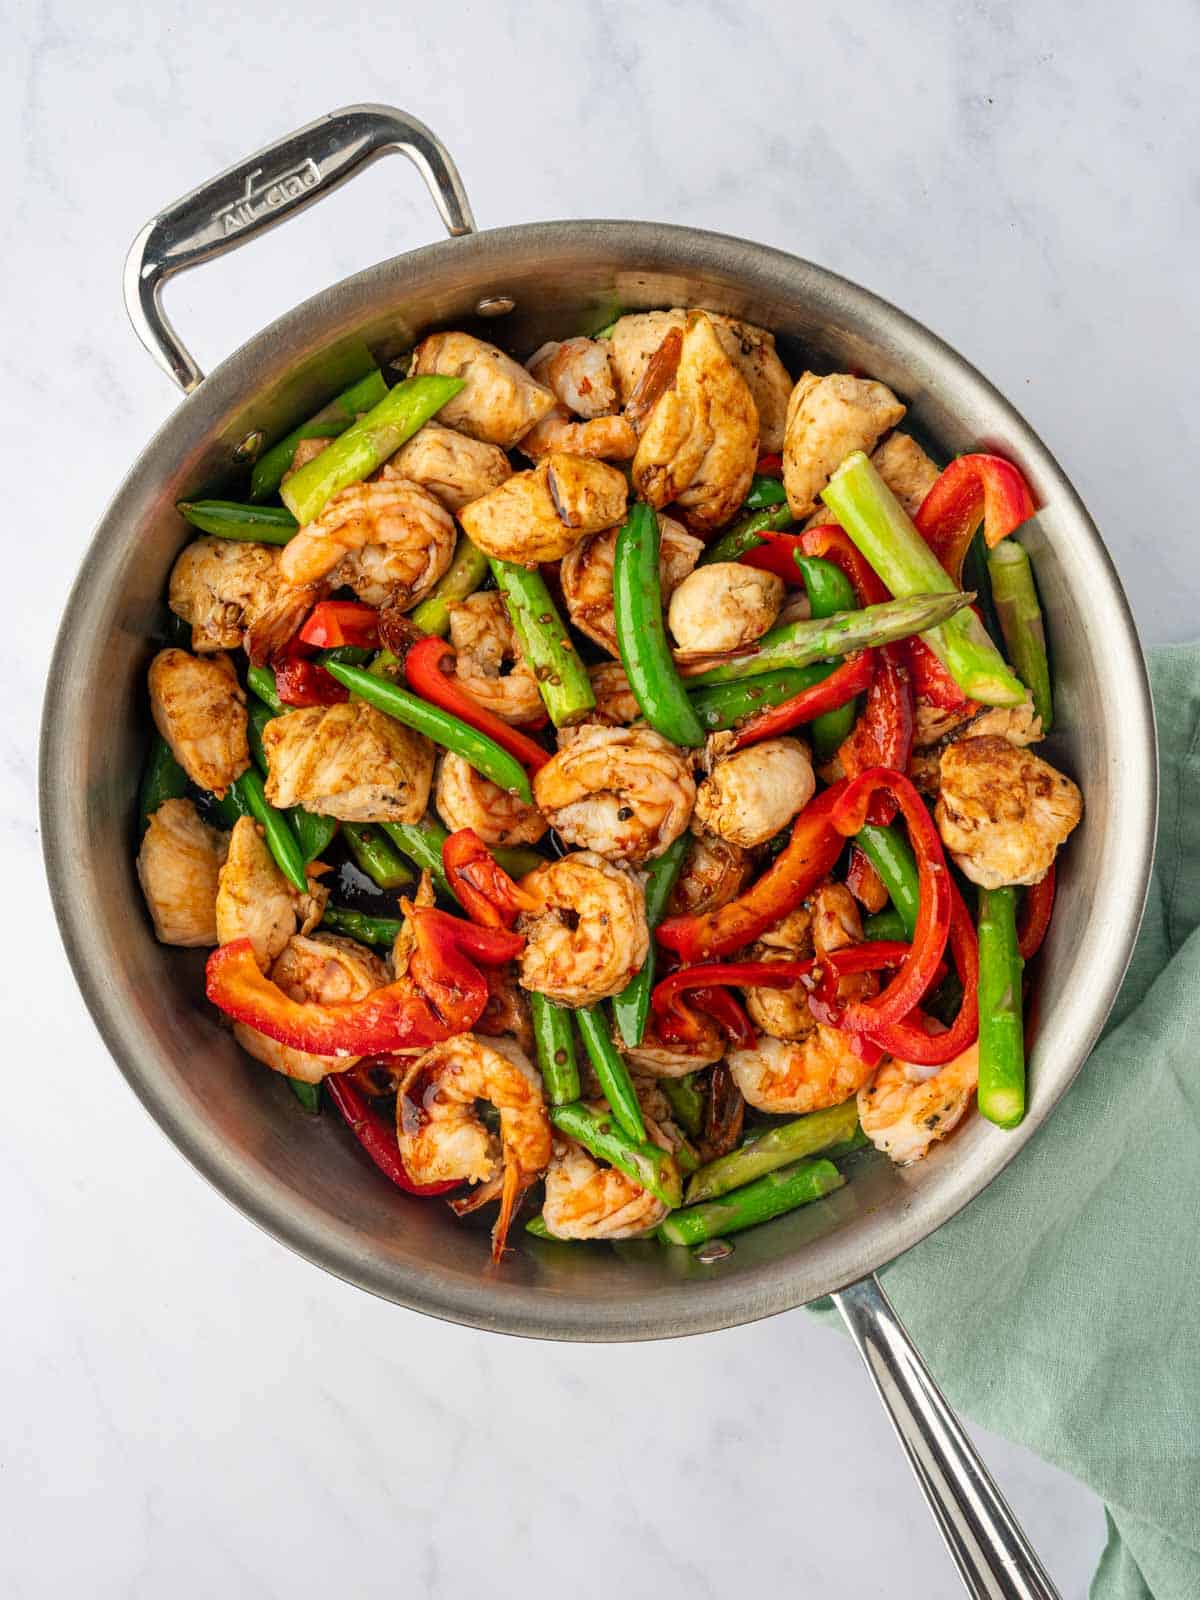 Chicken, shrimp and veggies in a skillet.